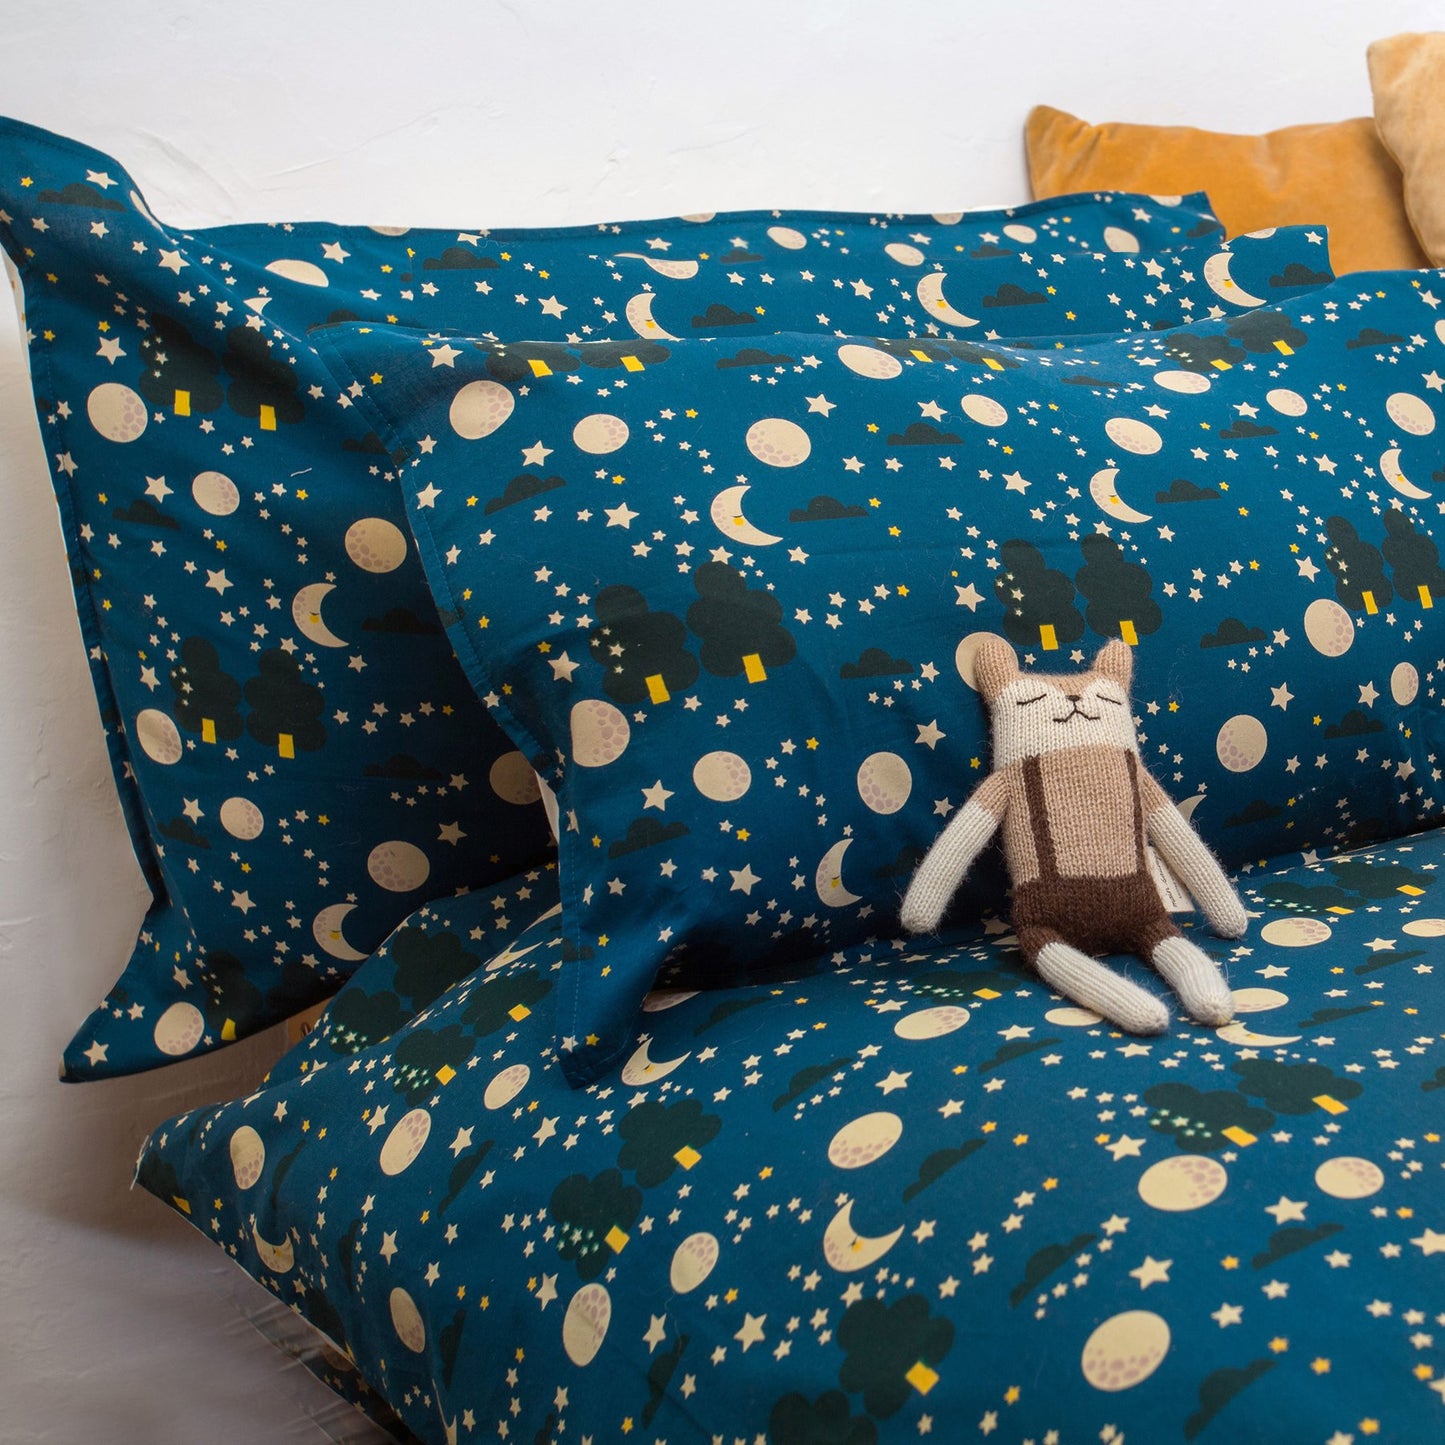 Pre-loved Organic Cotton Bedding Set by Little Green Radicals